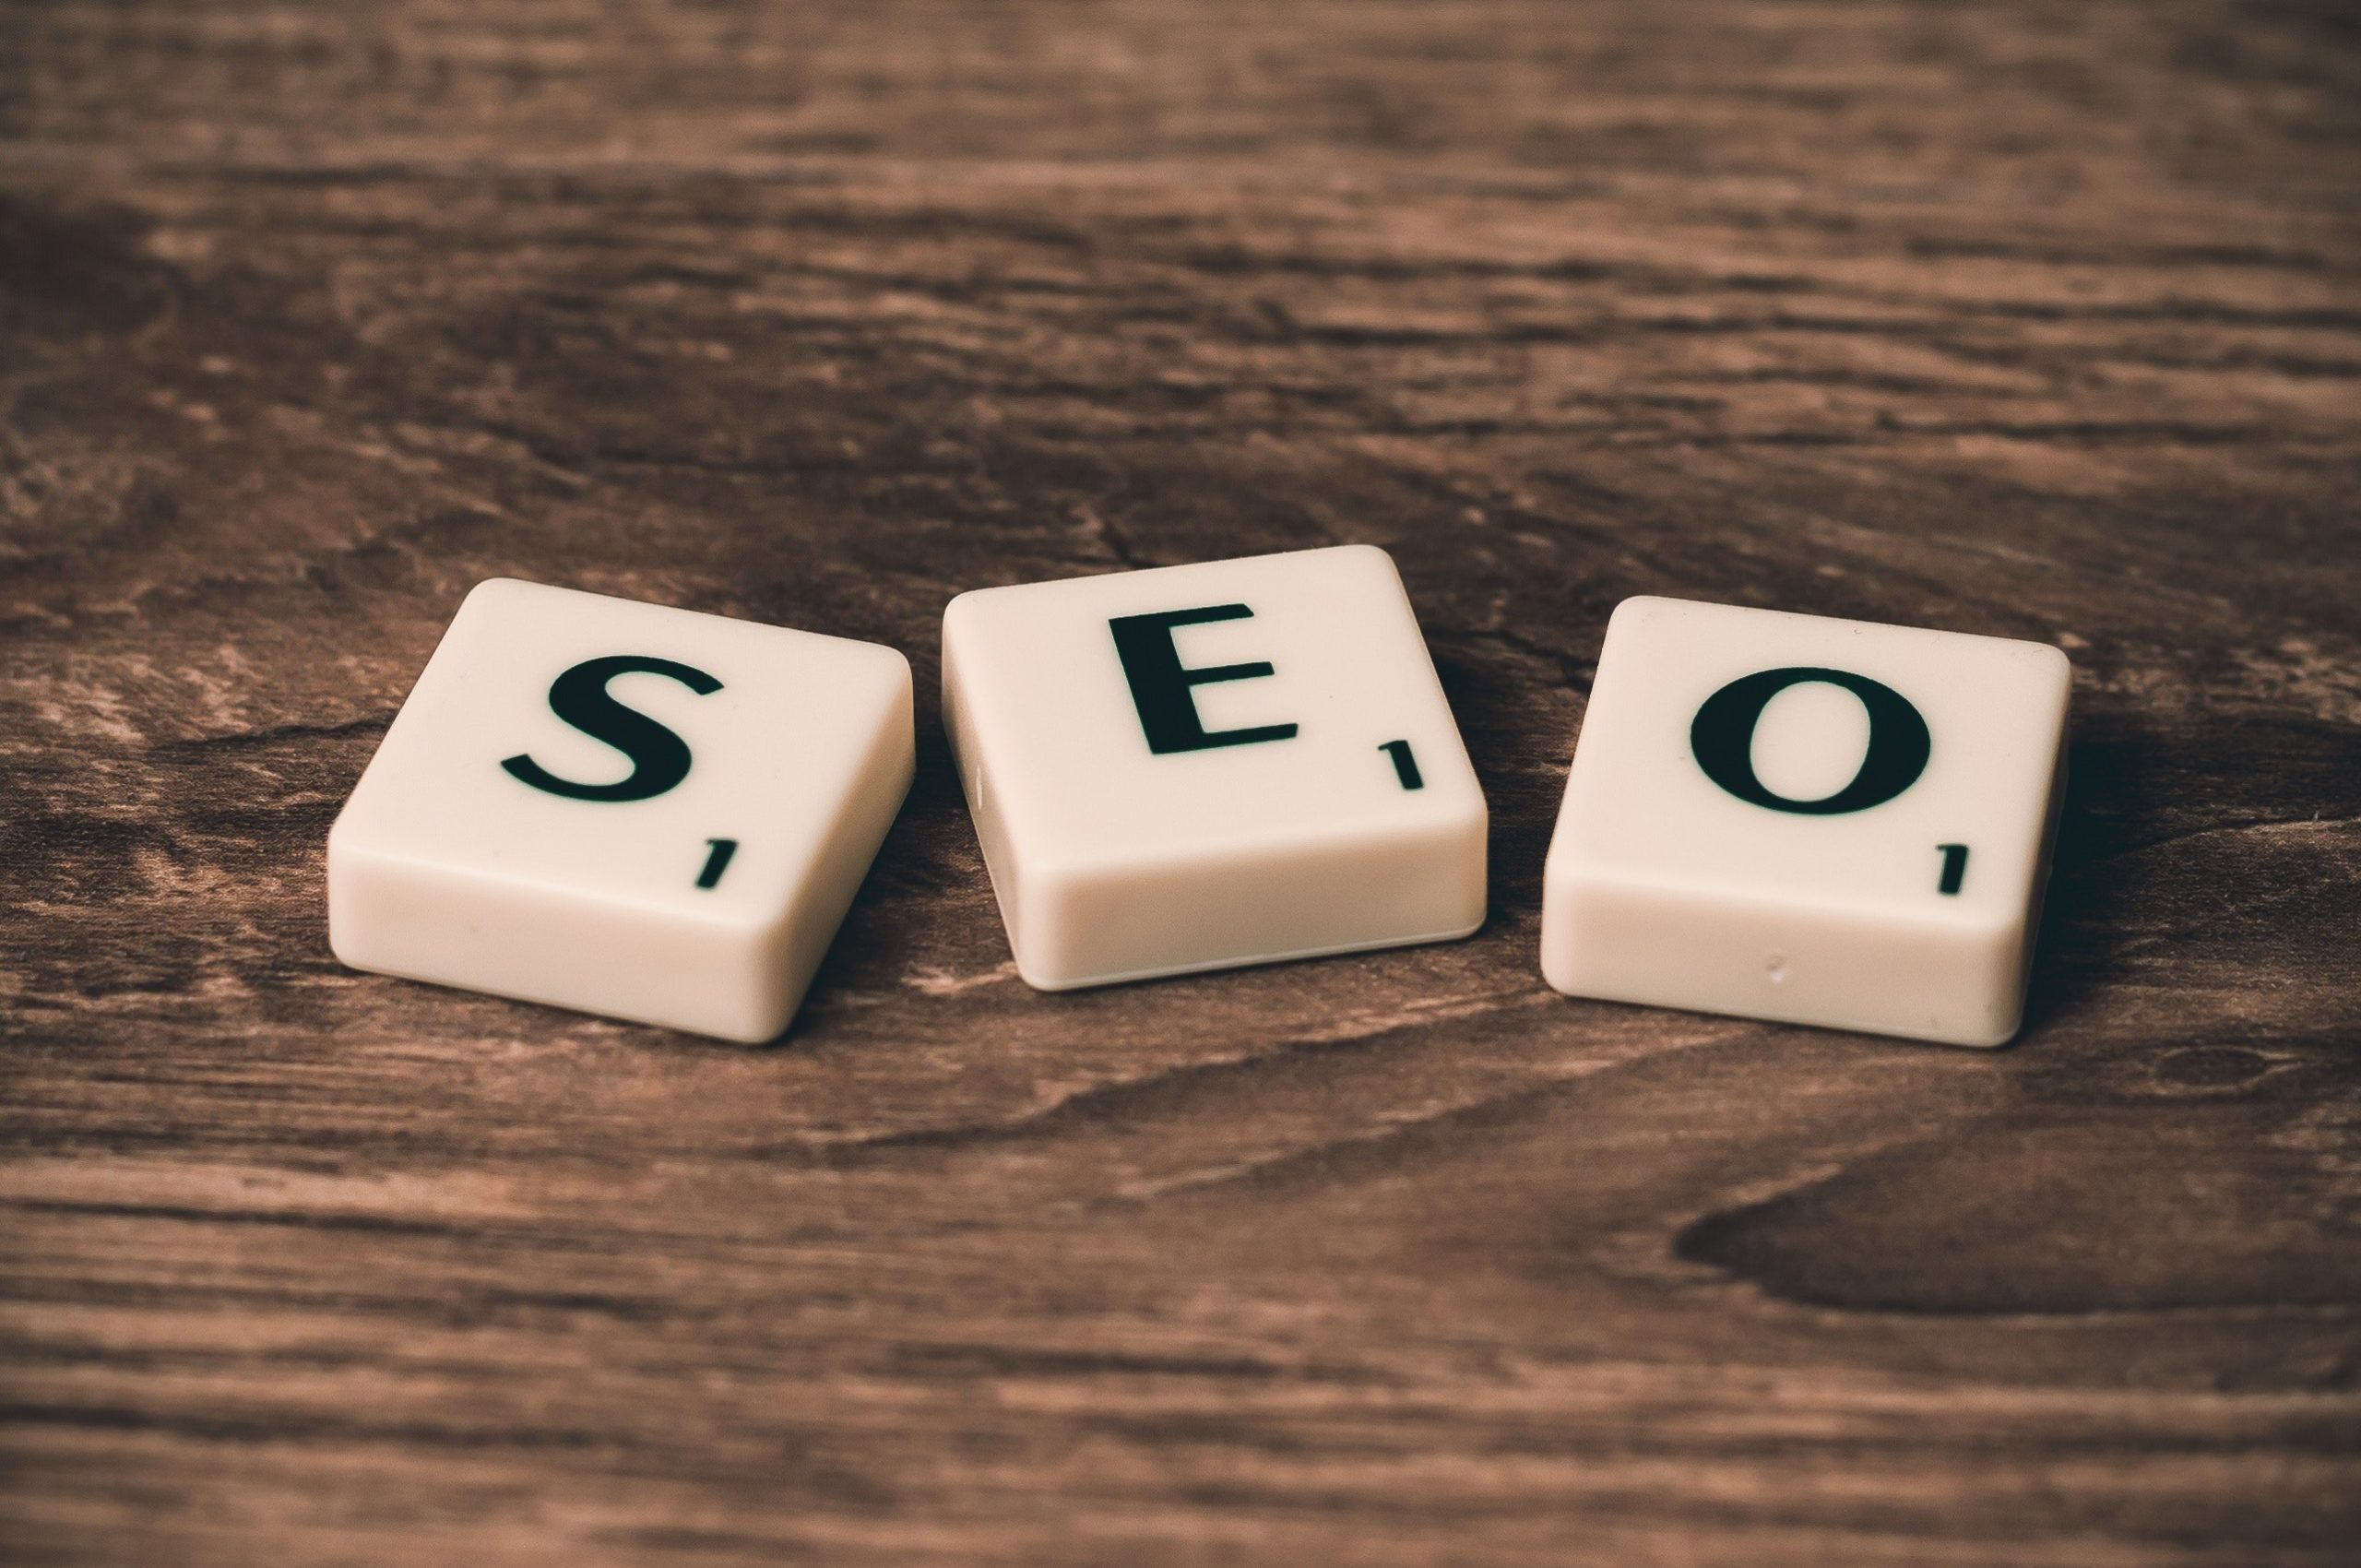 SEO is a crucial aspect to consider as a modern business